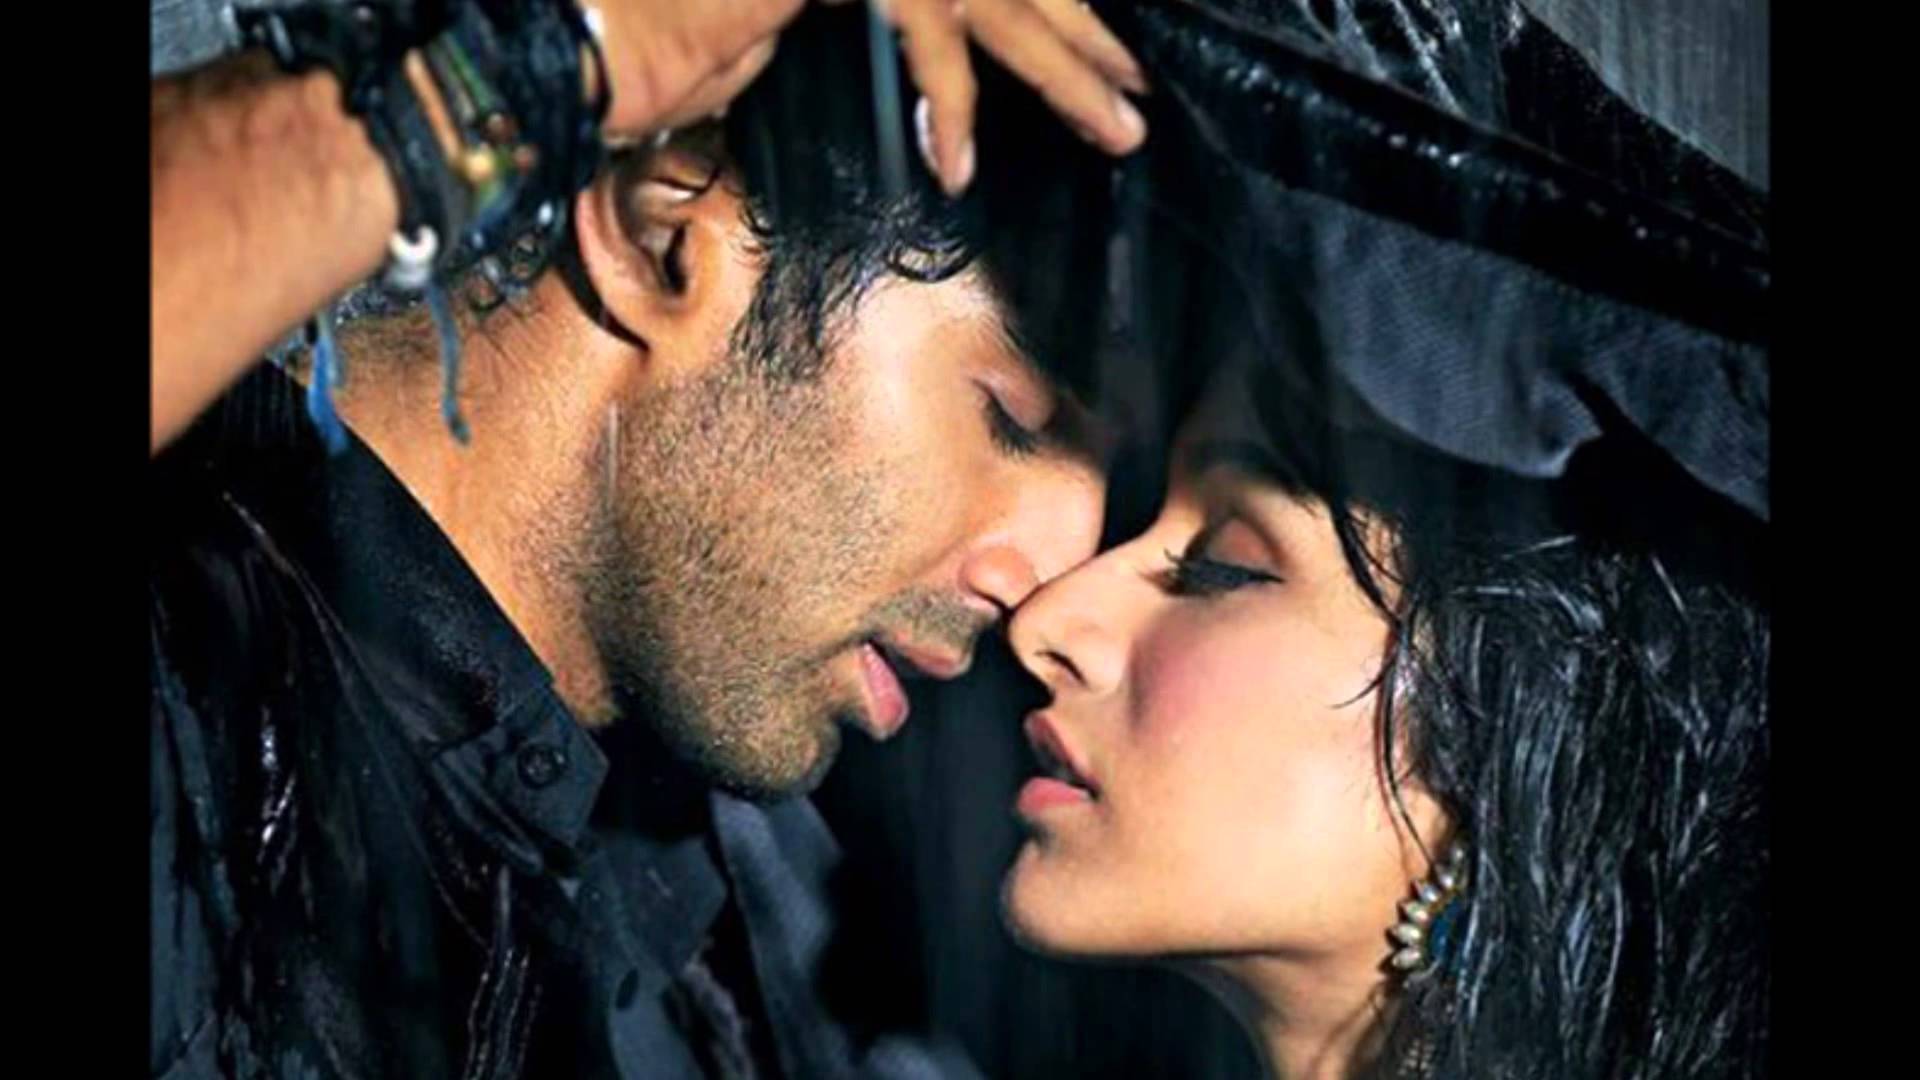 A Secene From The Song - Aashiqui 2 Images Hd , HD Wallpaper & Backgrounds